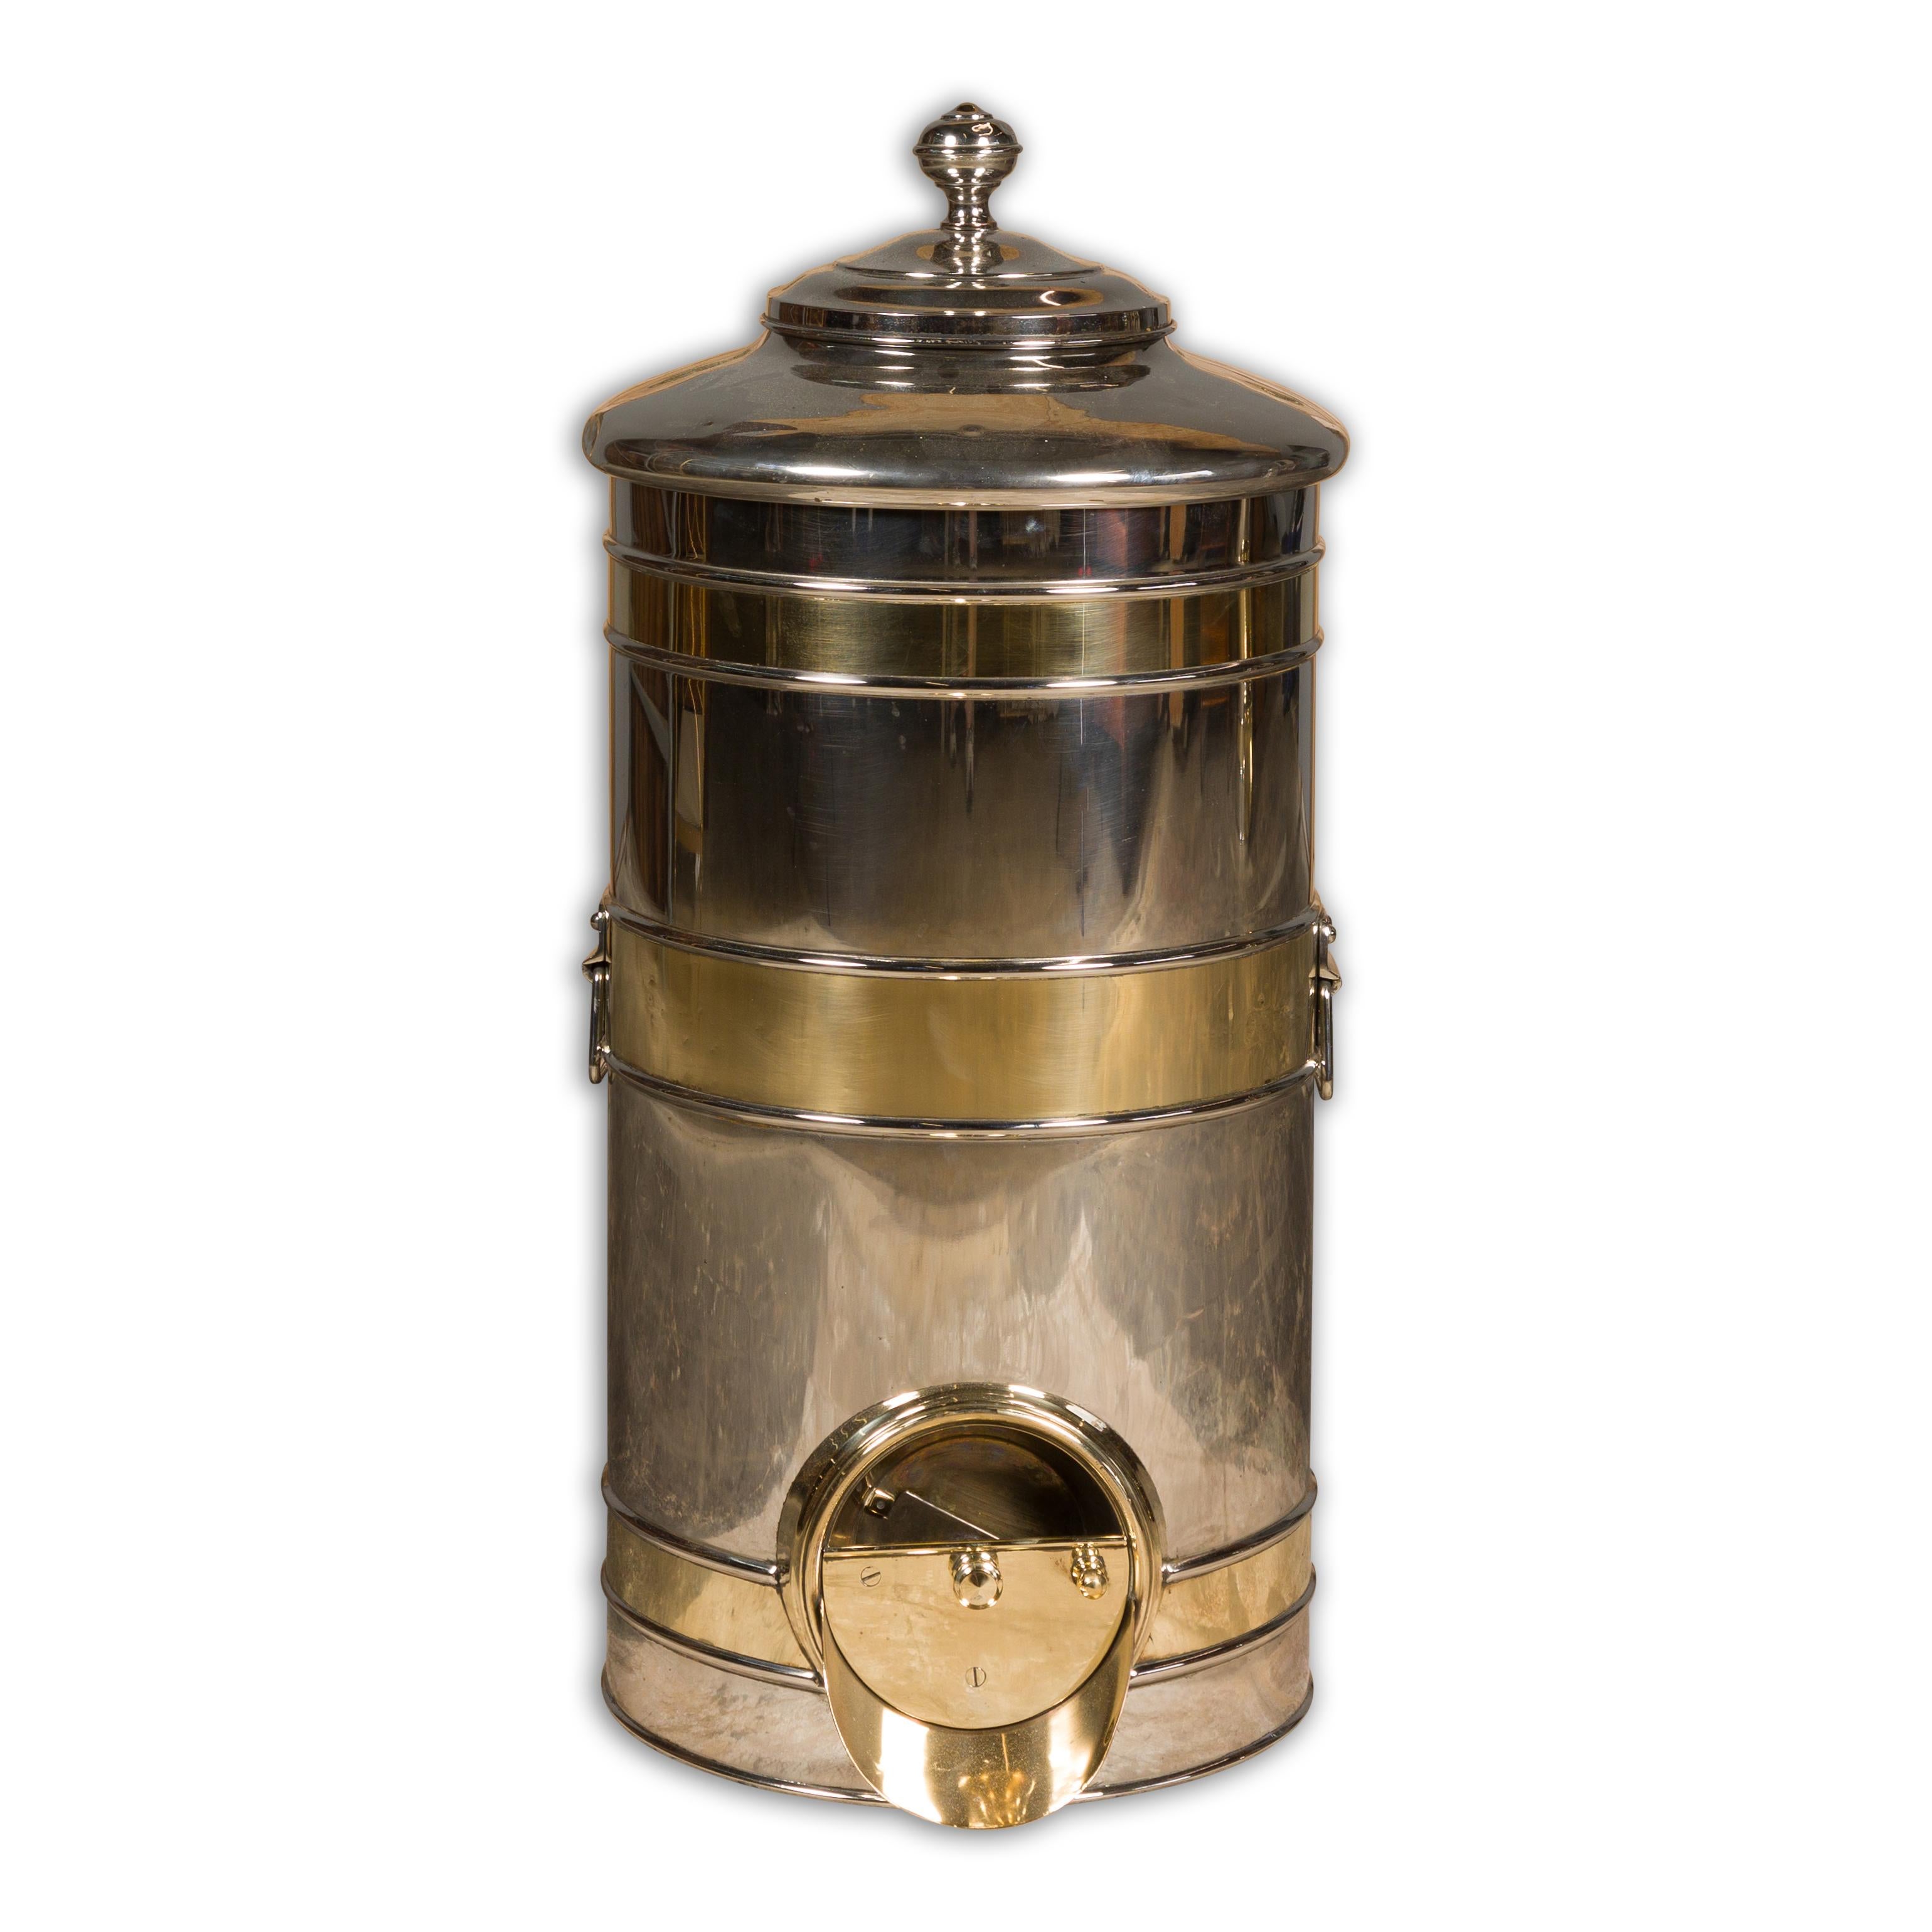 A French 1900s steel and brass coffee bean dispenser from the Turn of the Century. This French Turn of the Century coffee bean dispenser, crafted from steel and brass, is a captivating blend of vintage charm and functional elegance. Dating back to